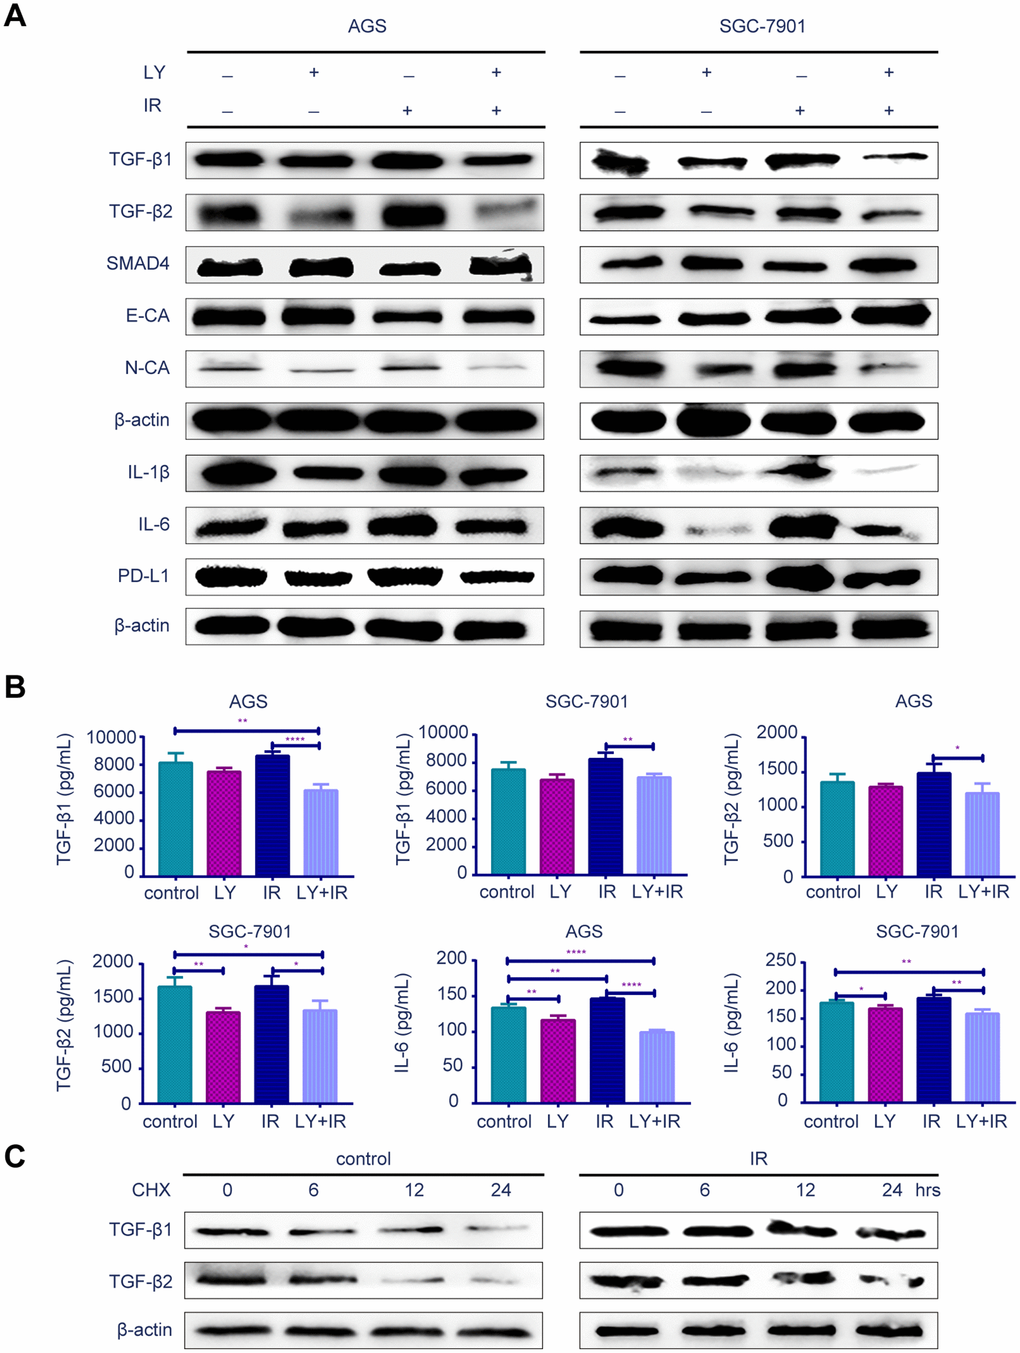 Effect of LY with or without irradiation on the gene expression of GC cell lines. (A) Western blot analysis: representative results of the TGF-β1, TGF-β2, SMAD4,E-CA, N-CA, IL-1β, IL-6, PD-L1 and γ-H2AX expressions in GC cells after LY with or without irradiation treatment. (B) ELISA: the expression of TGF-β1, TGF-β2 and IL-6 in culture medium of GC cells after LY with or without irradiation treatment. (C) Western blot analysis: the protein stability of TGF-β1 and TGF-β2 regulated in response to irradiation. All data represent three independent experiments, mean ± SEM, *P0.05, **P0.01, ***P0.001, ****P0.0001.